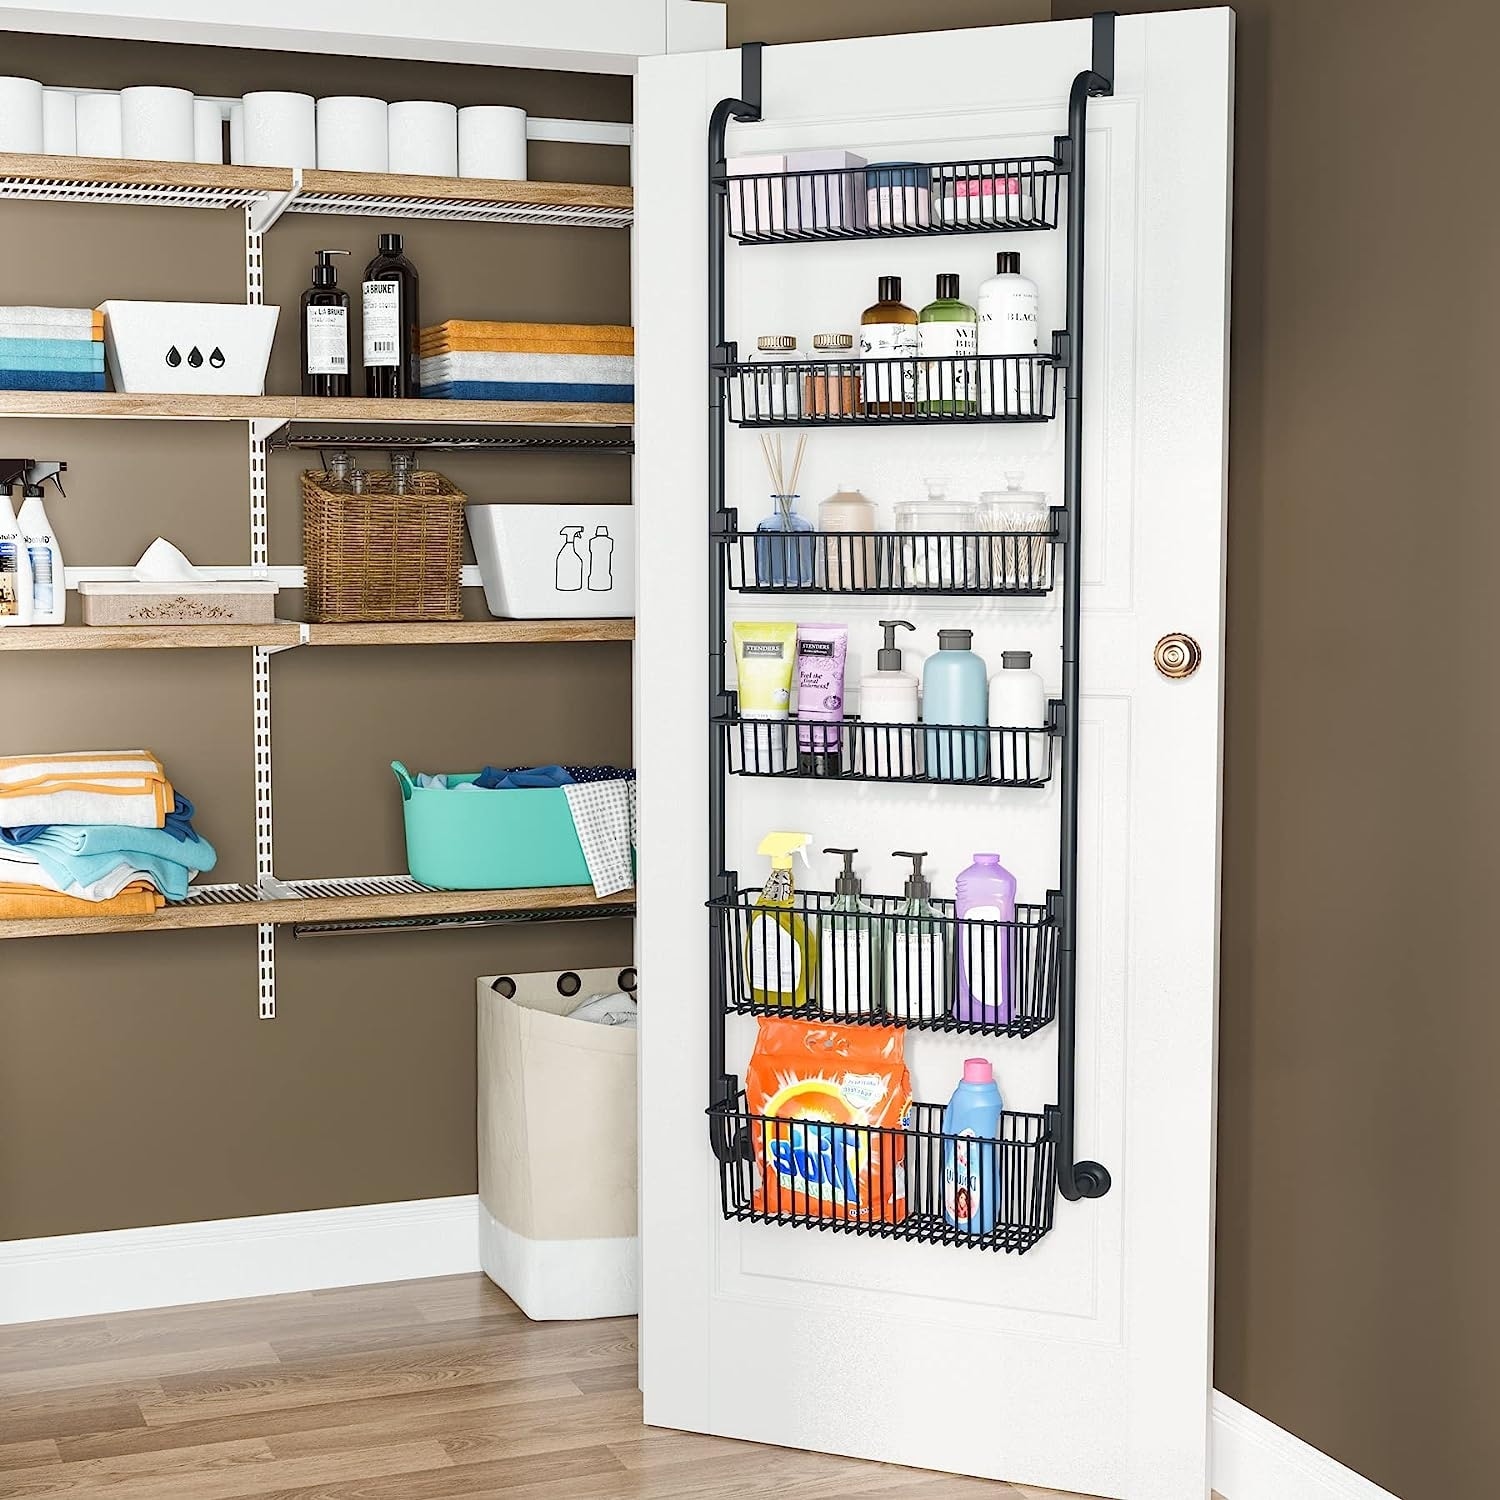 https://ak1.ostkcdn.com/images/products/is/images/direct/1ca1a5ed0524cdc27136ee80365a2bf2e84602fe/Over-the-Door-Pantry-Organizer%2C-Heavy-Duty-Metal-Door-Organizer.jpg